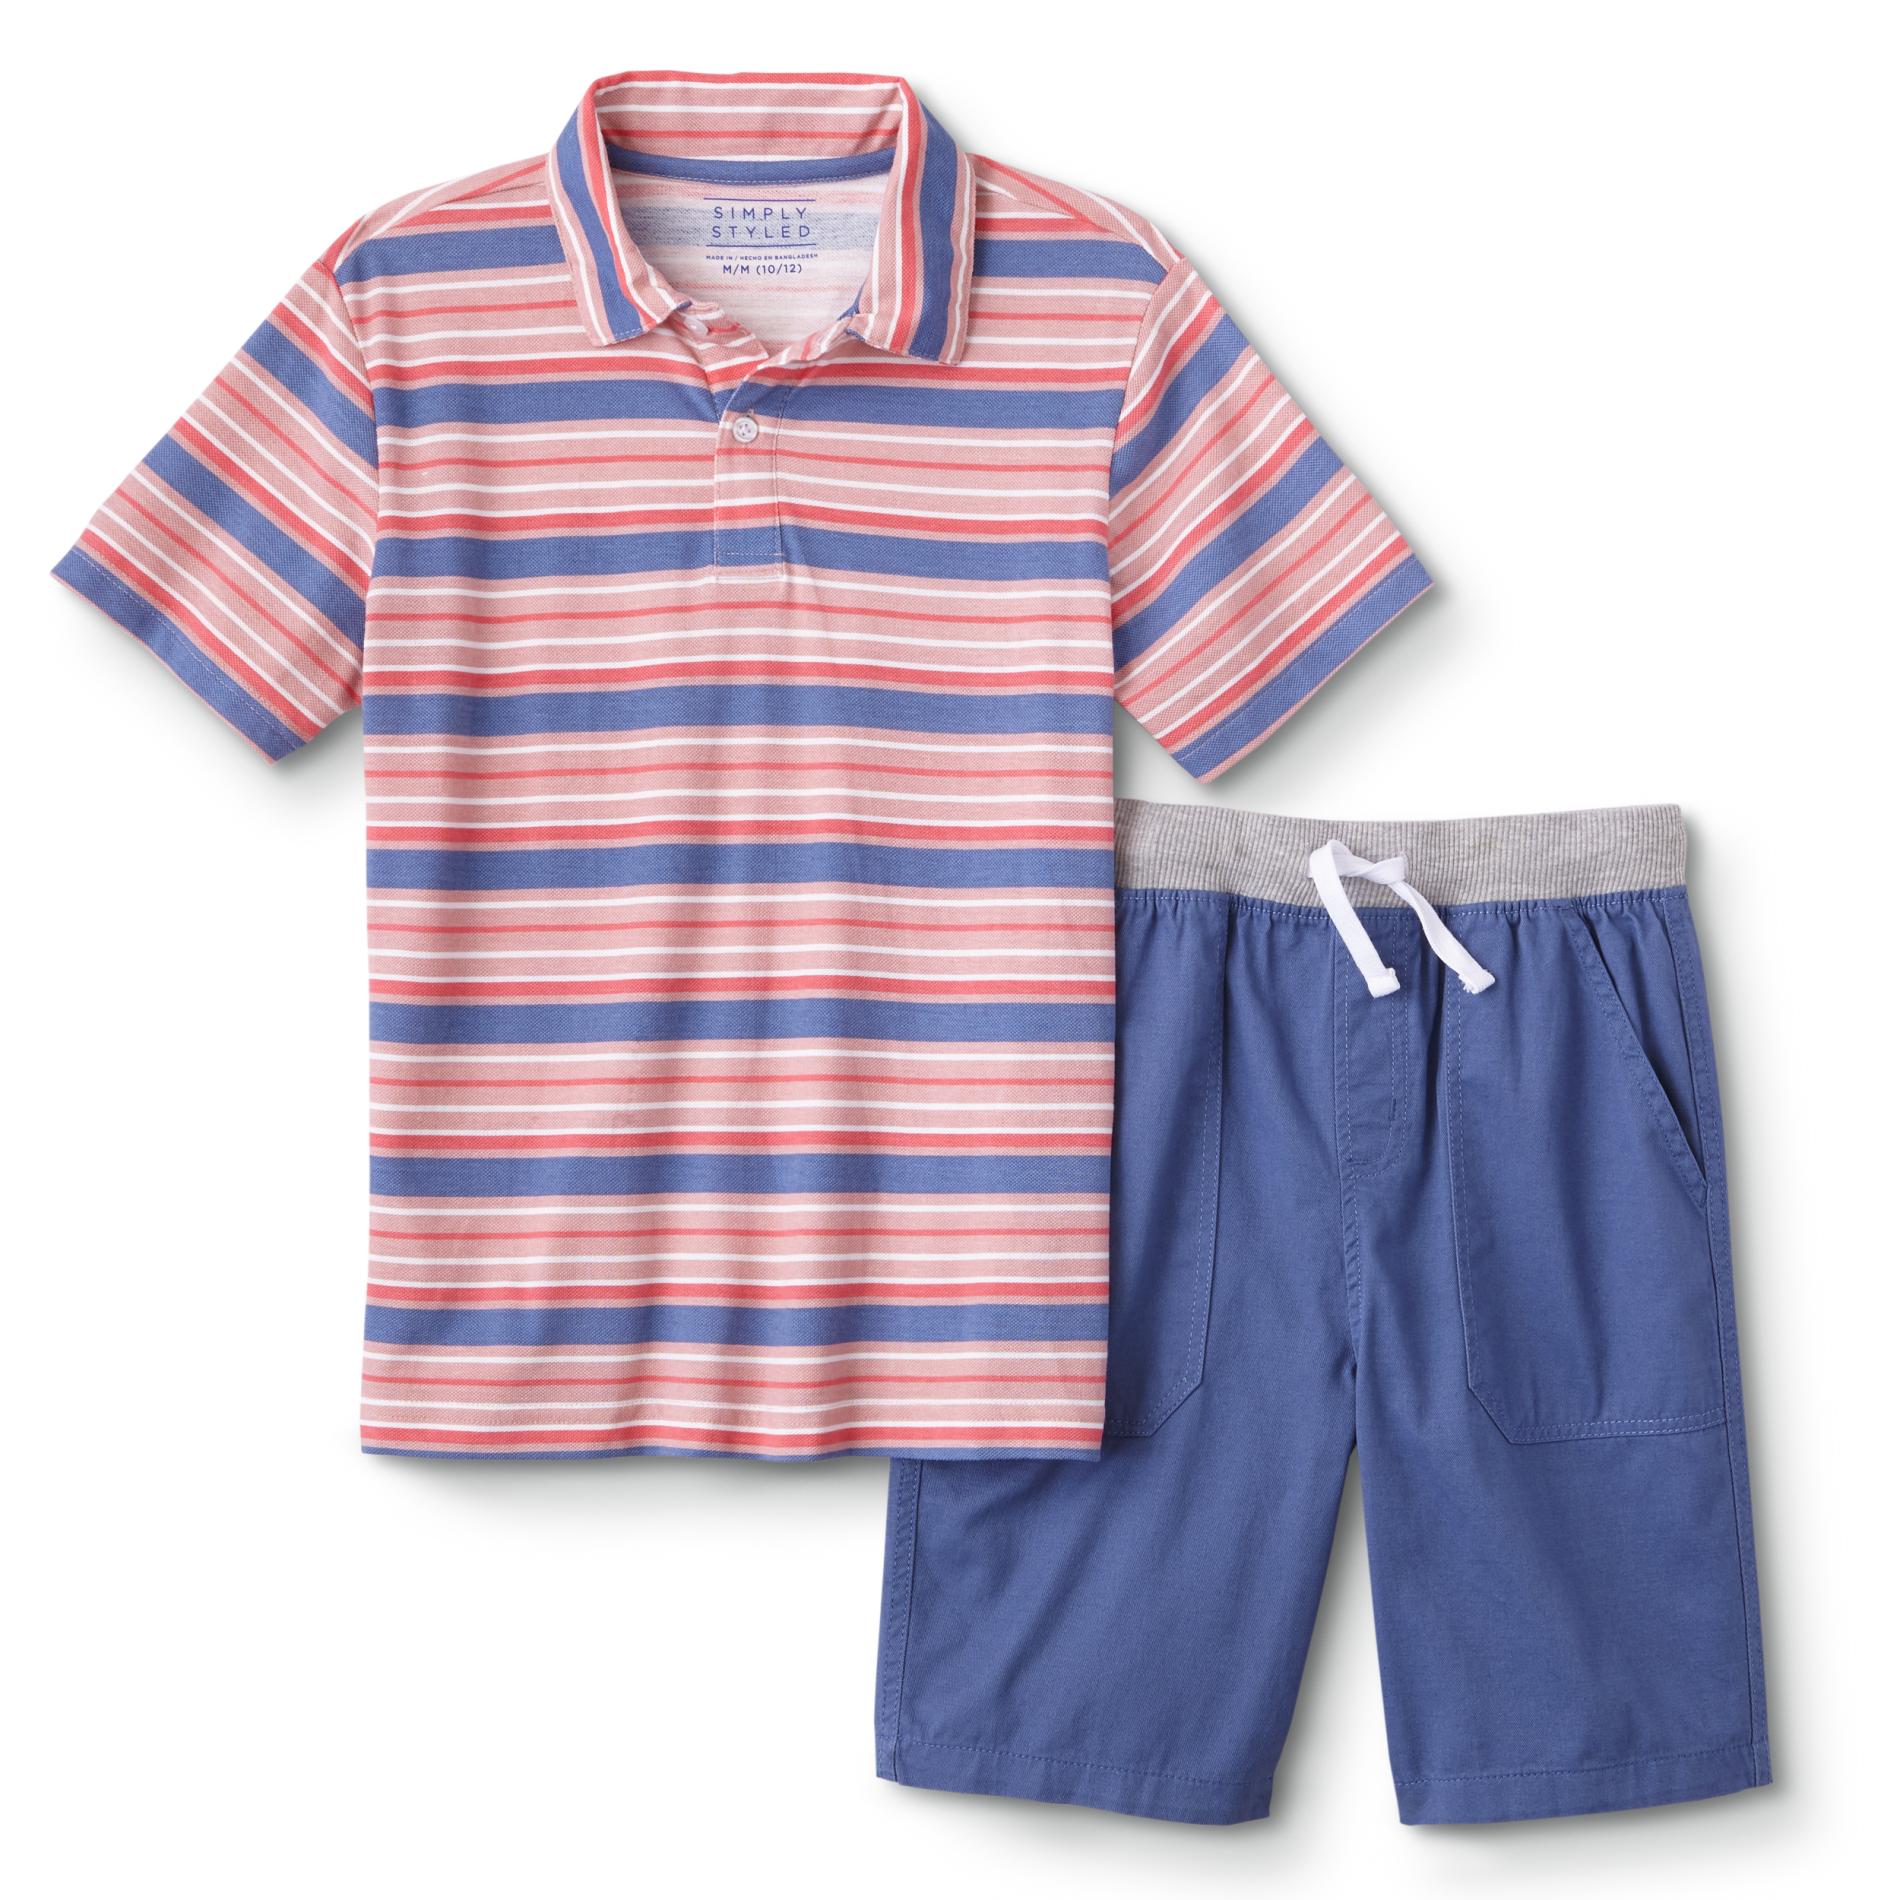 Simply Styled Boys' Polo Shirt & Shorts - Striped